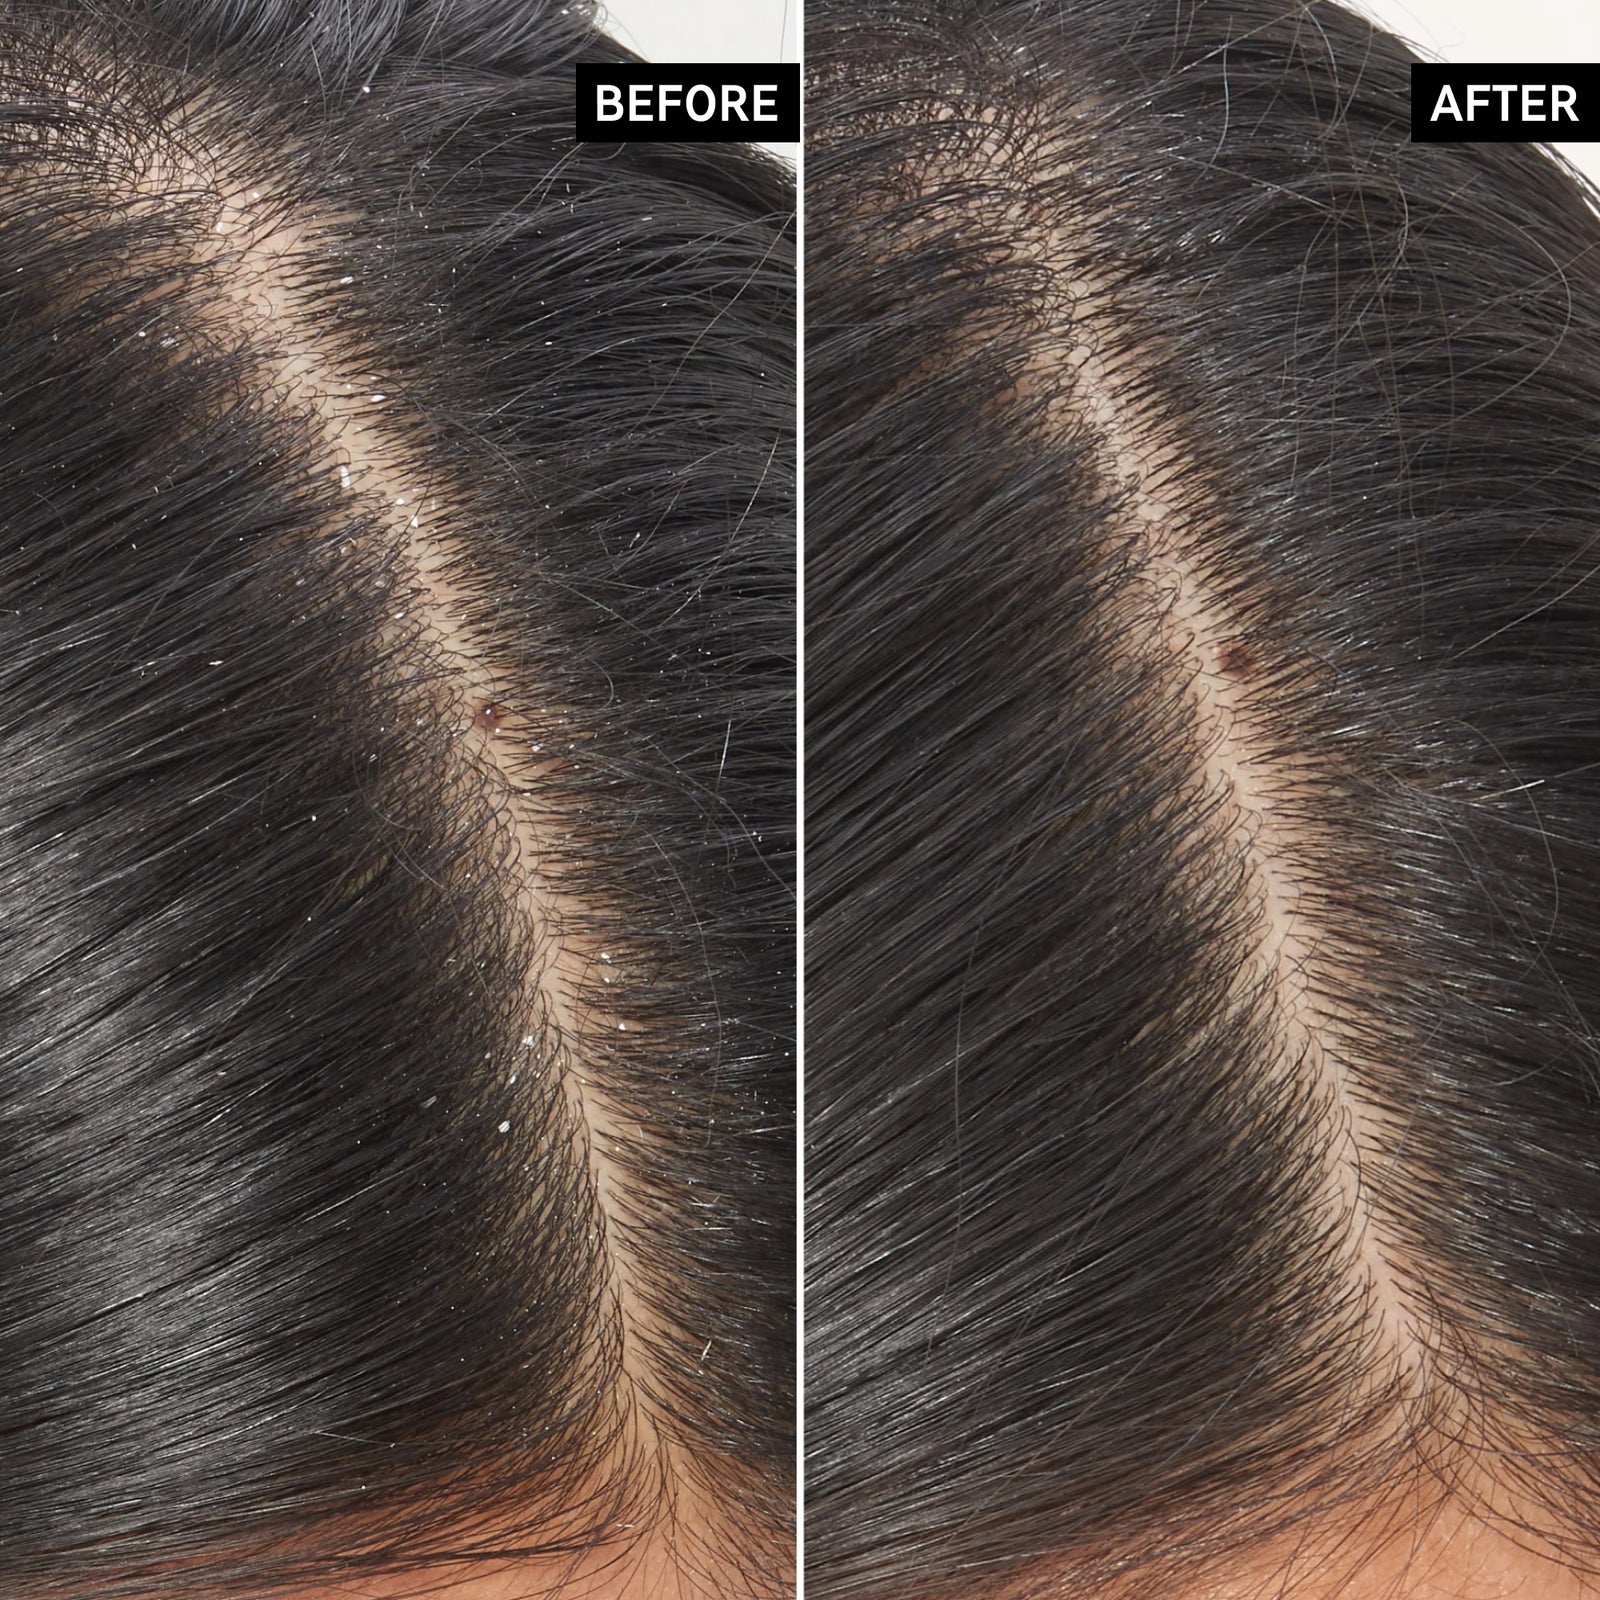 Before and after of using Salicylic Acid scalp treament